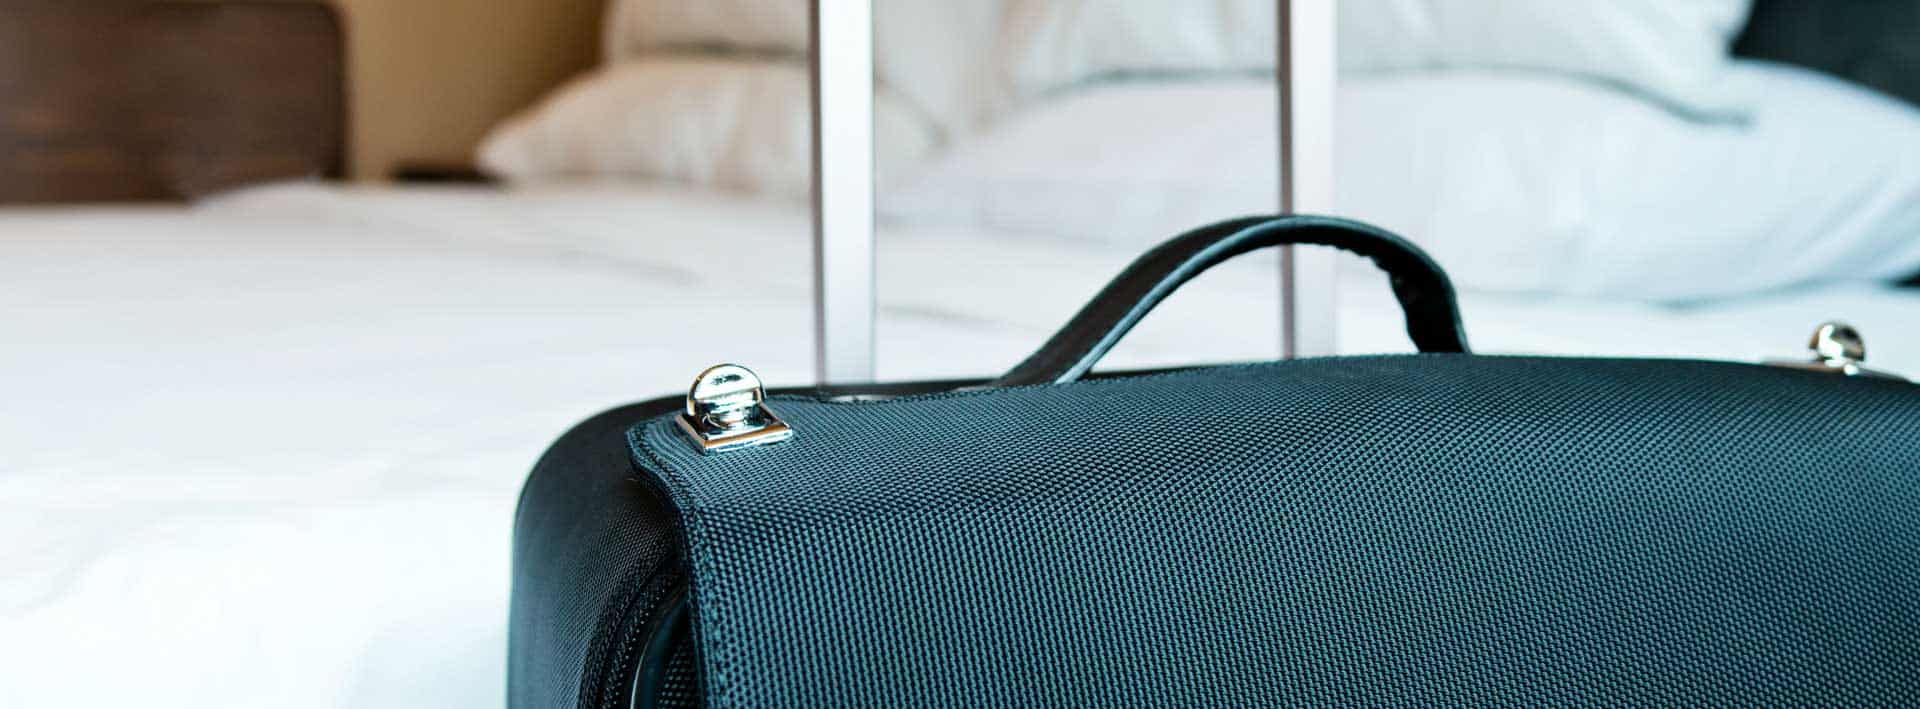 Luggage in hotel room to promote leading hotel insurance brokers Full Time Cover